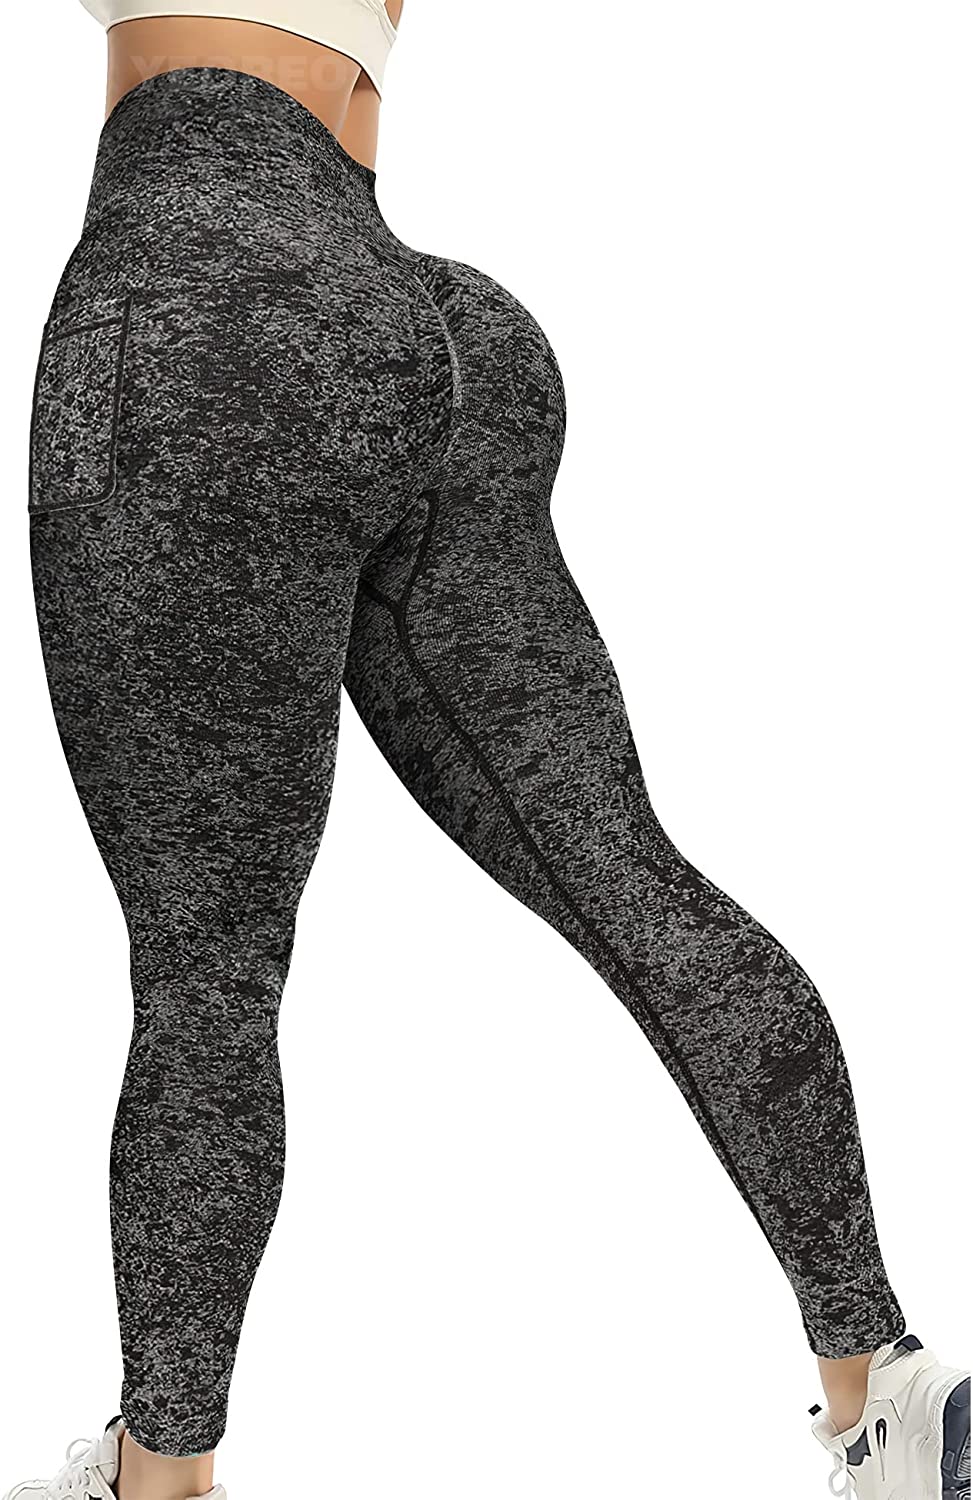 Orange Camouflage Yoga Leggings for Women High Waisted Full Length Camo  Pattern Print Workout Pants Perfect for Running, Crossfit and Gym -   Canada